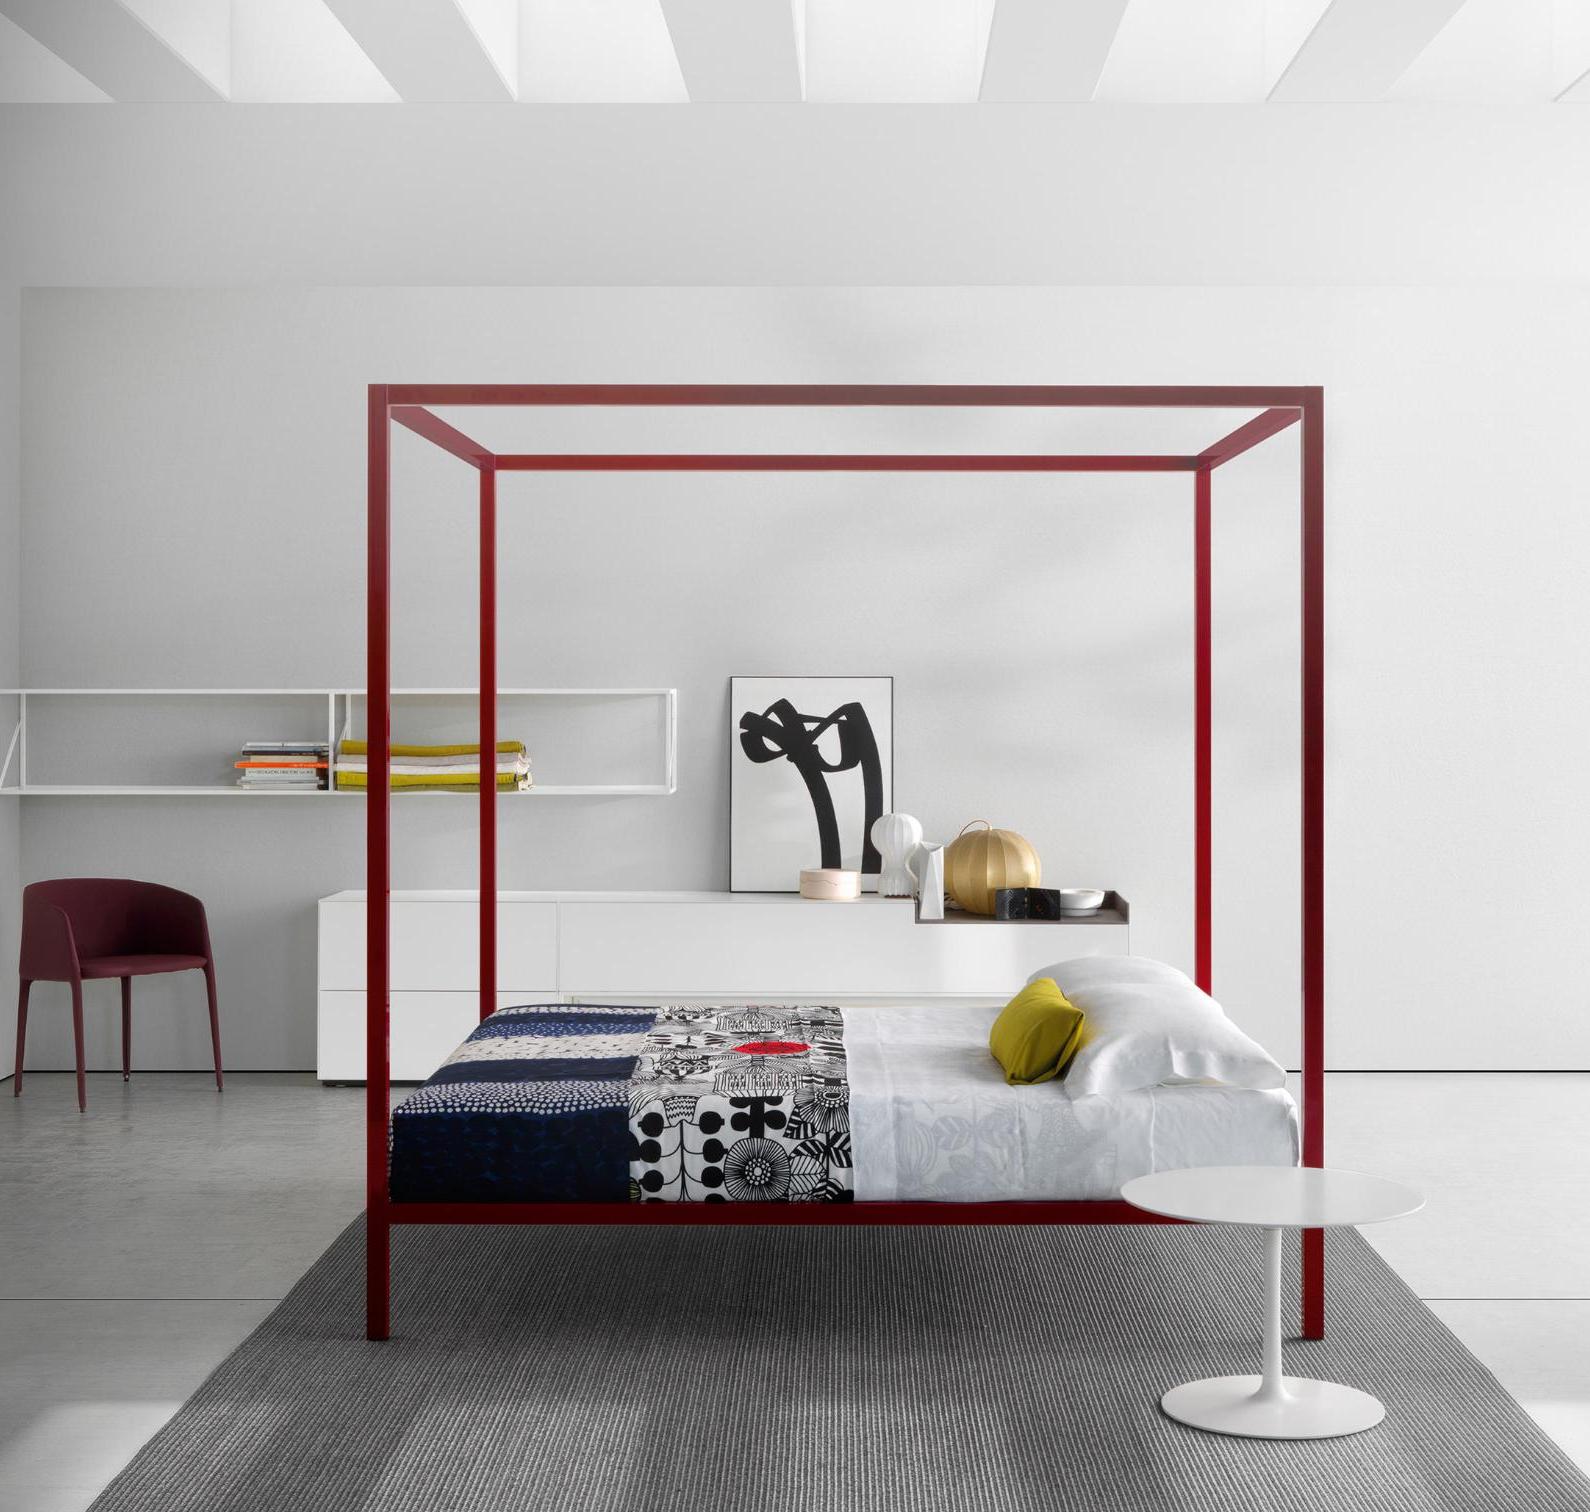 Aluminium Canopy Bed ☞ Structure: Gloss Painted White X060 ☞ Dimensions: 150 x 210 cm